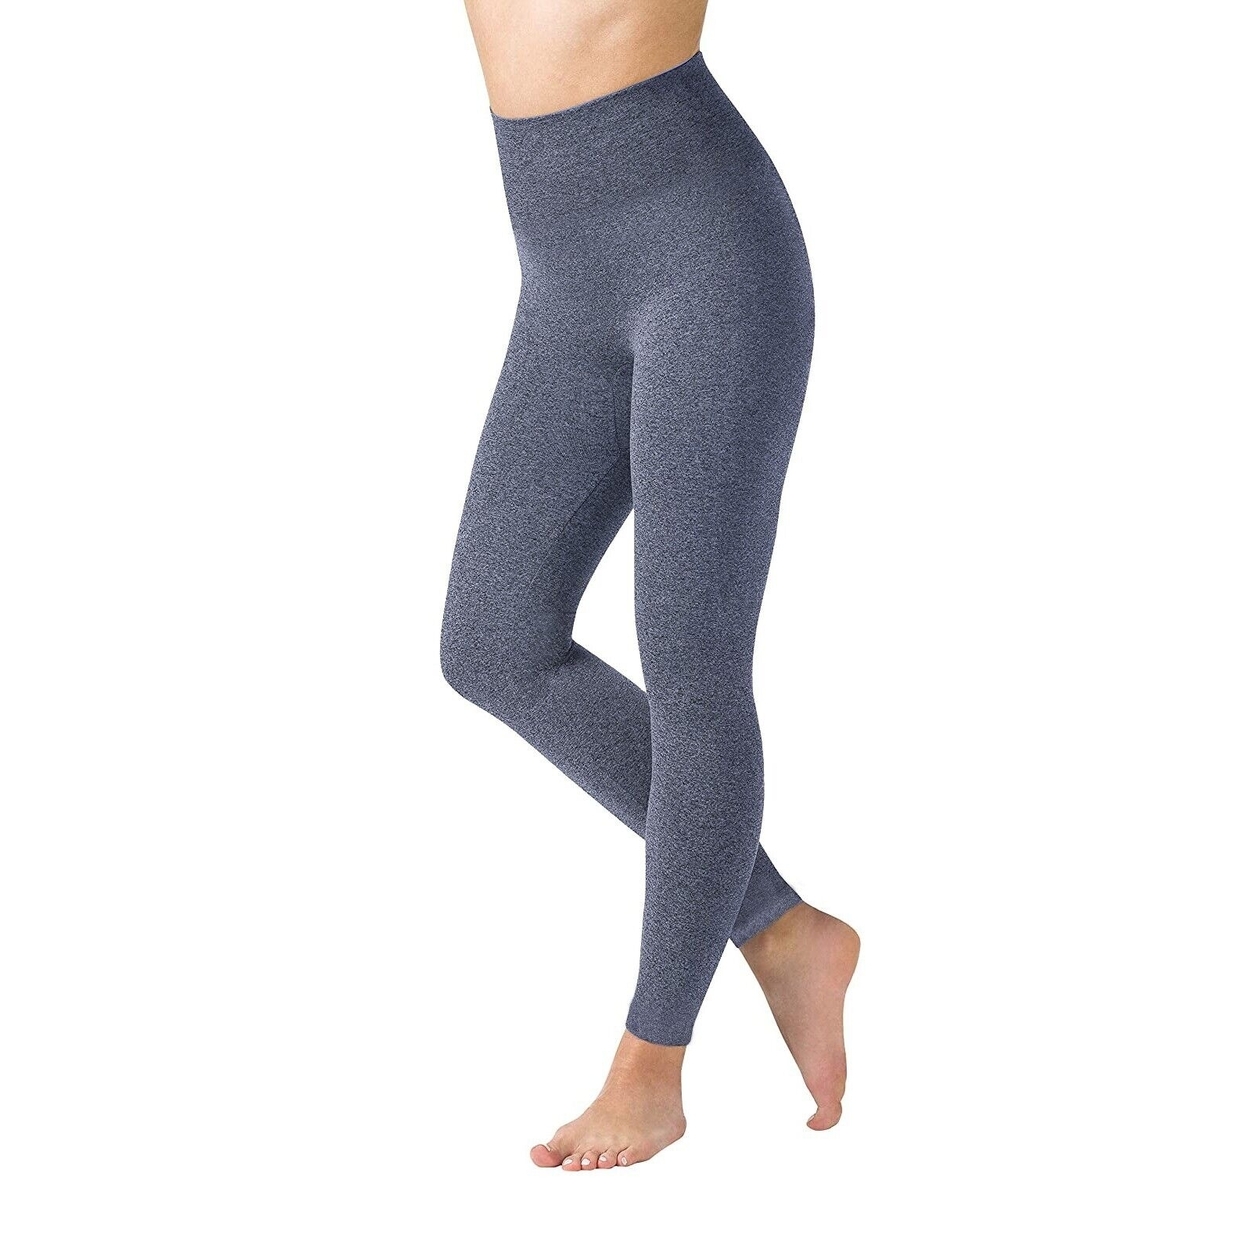 Multi-Packs Women High Waisted Fleece Lined Marled Leggings Ultra Soft Warm Pant - Charcoal, 2, Small